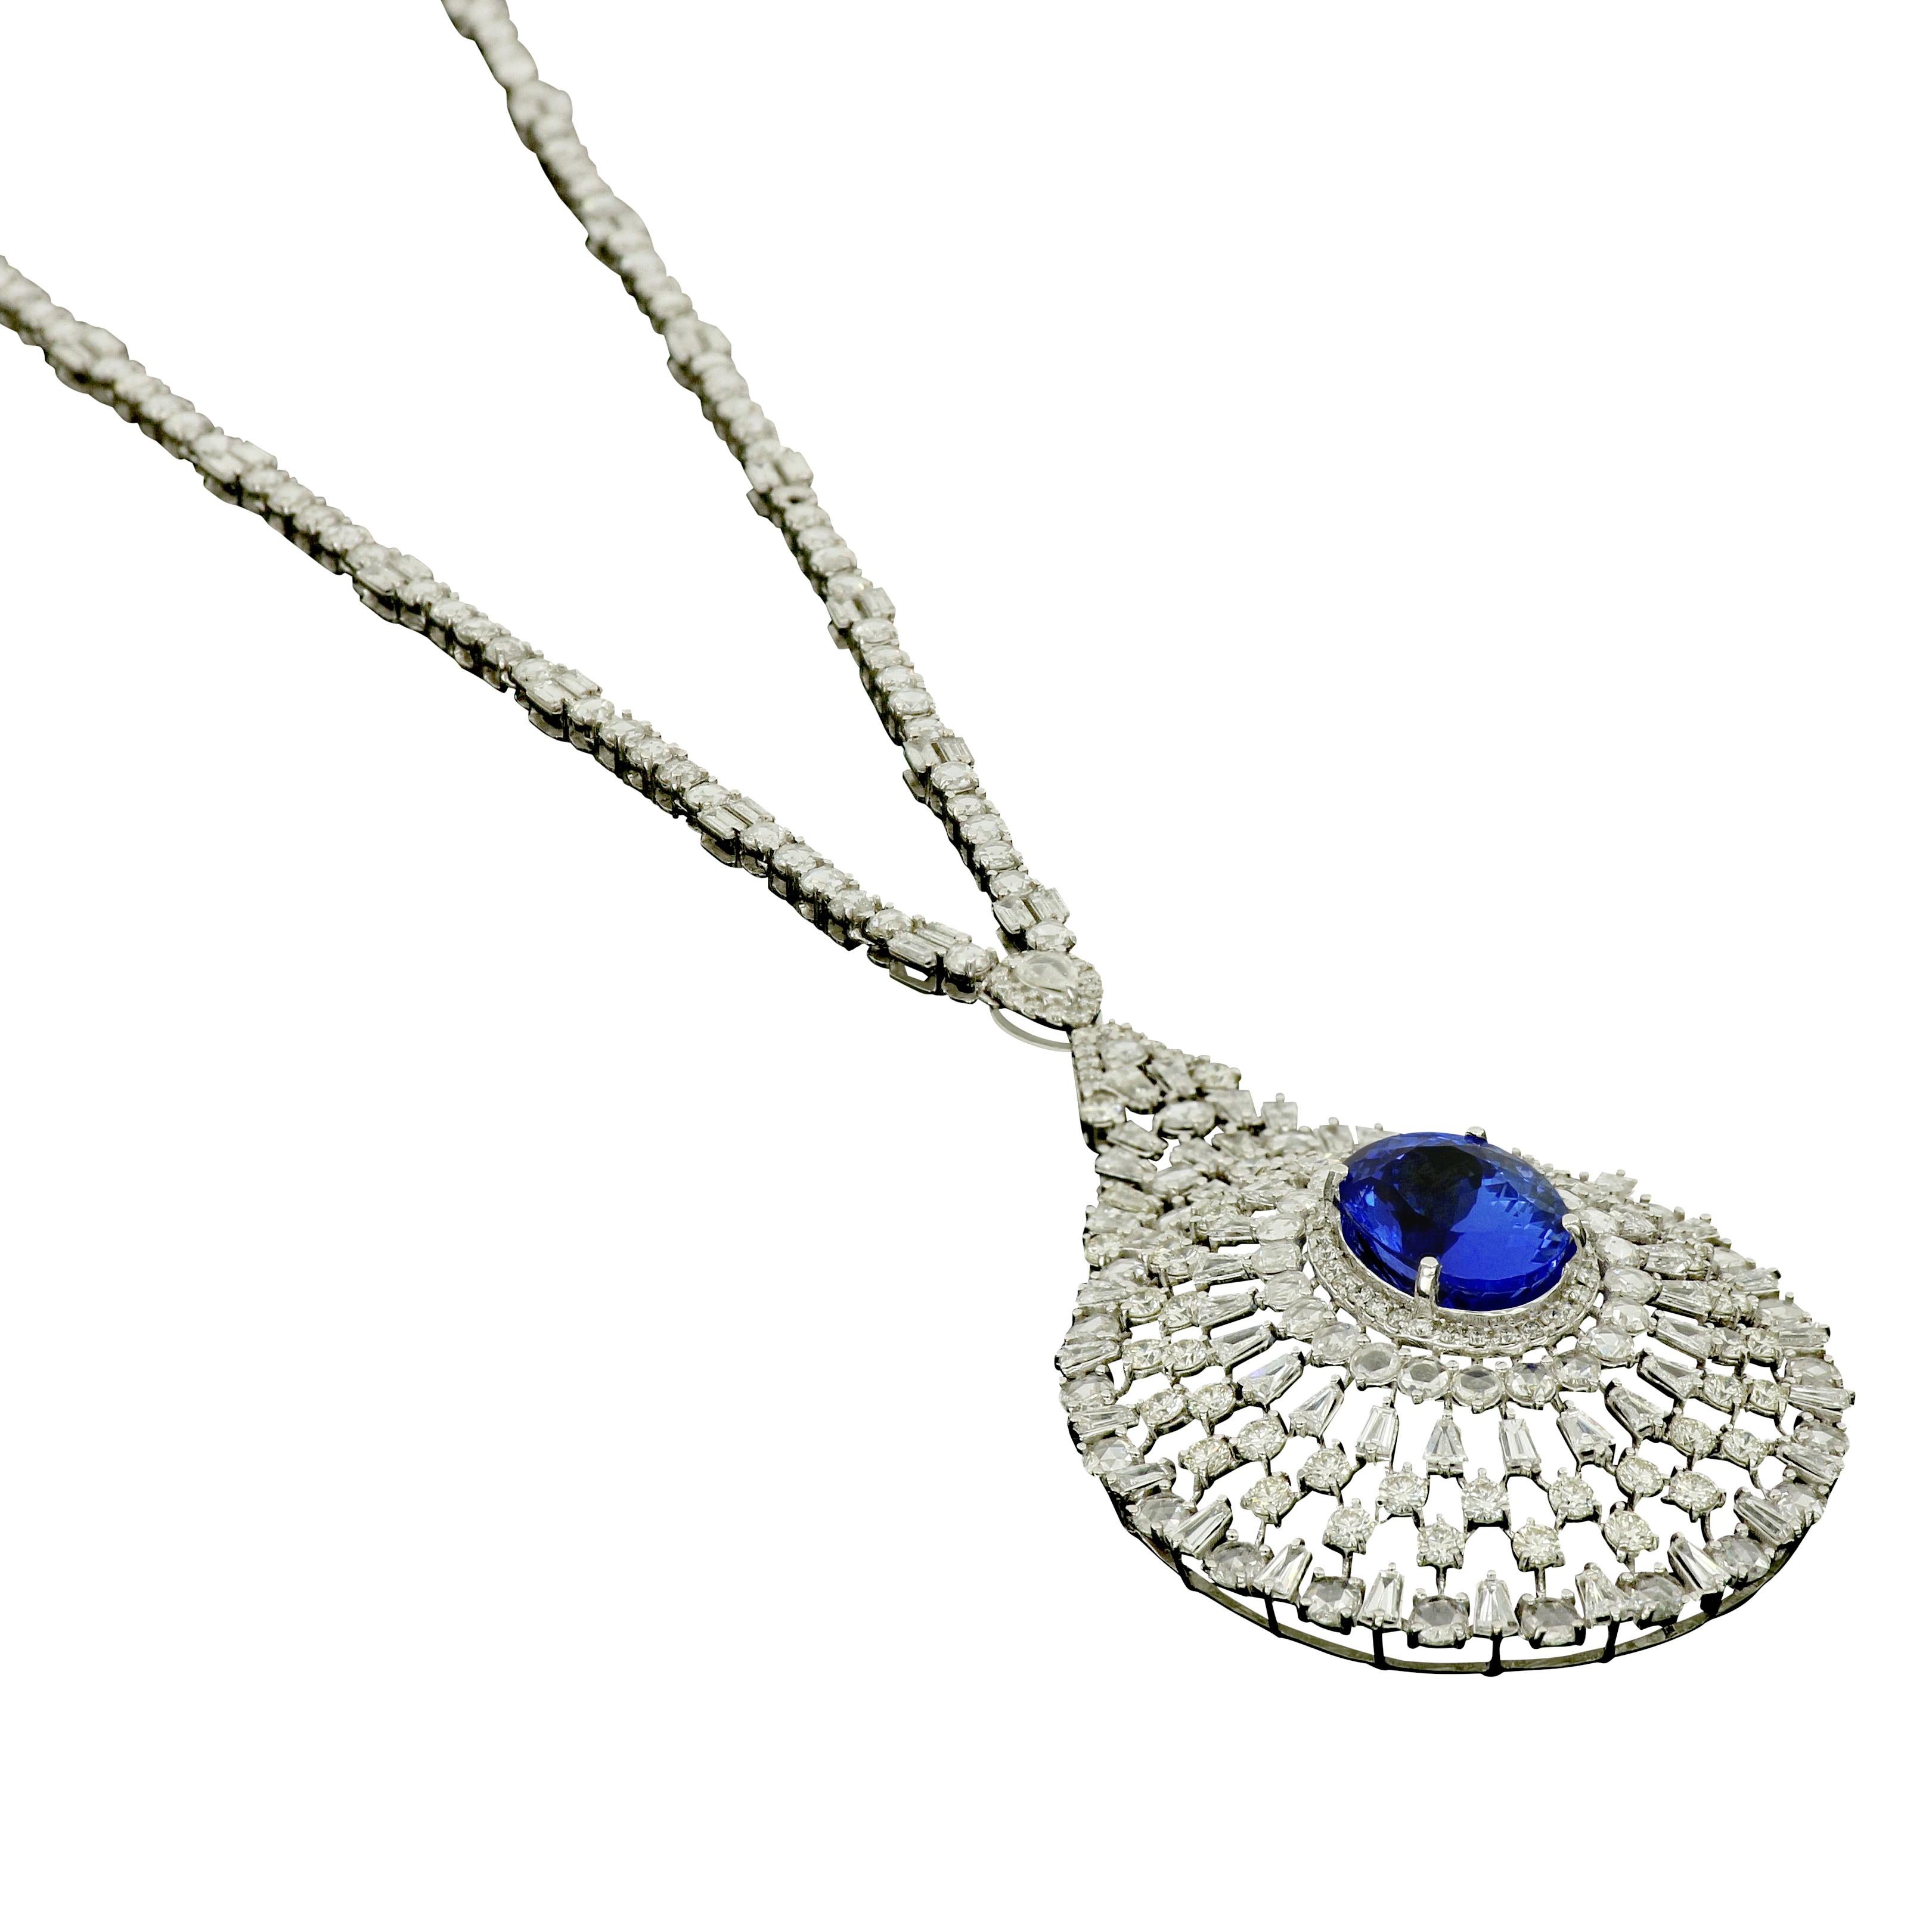 Suspended from round, trapeze and rose cut diamonds chain, Amwaj classic chandelier necklace in 18 karat white gold features multi cut diamonds grouped by oval purple tanzanite, set to form an elegant eyes motif, bringing their delicate, graceful